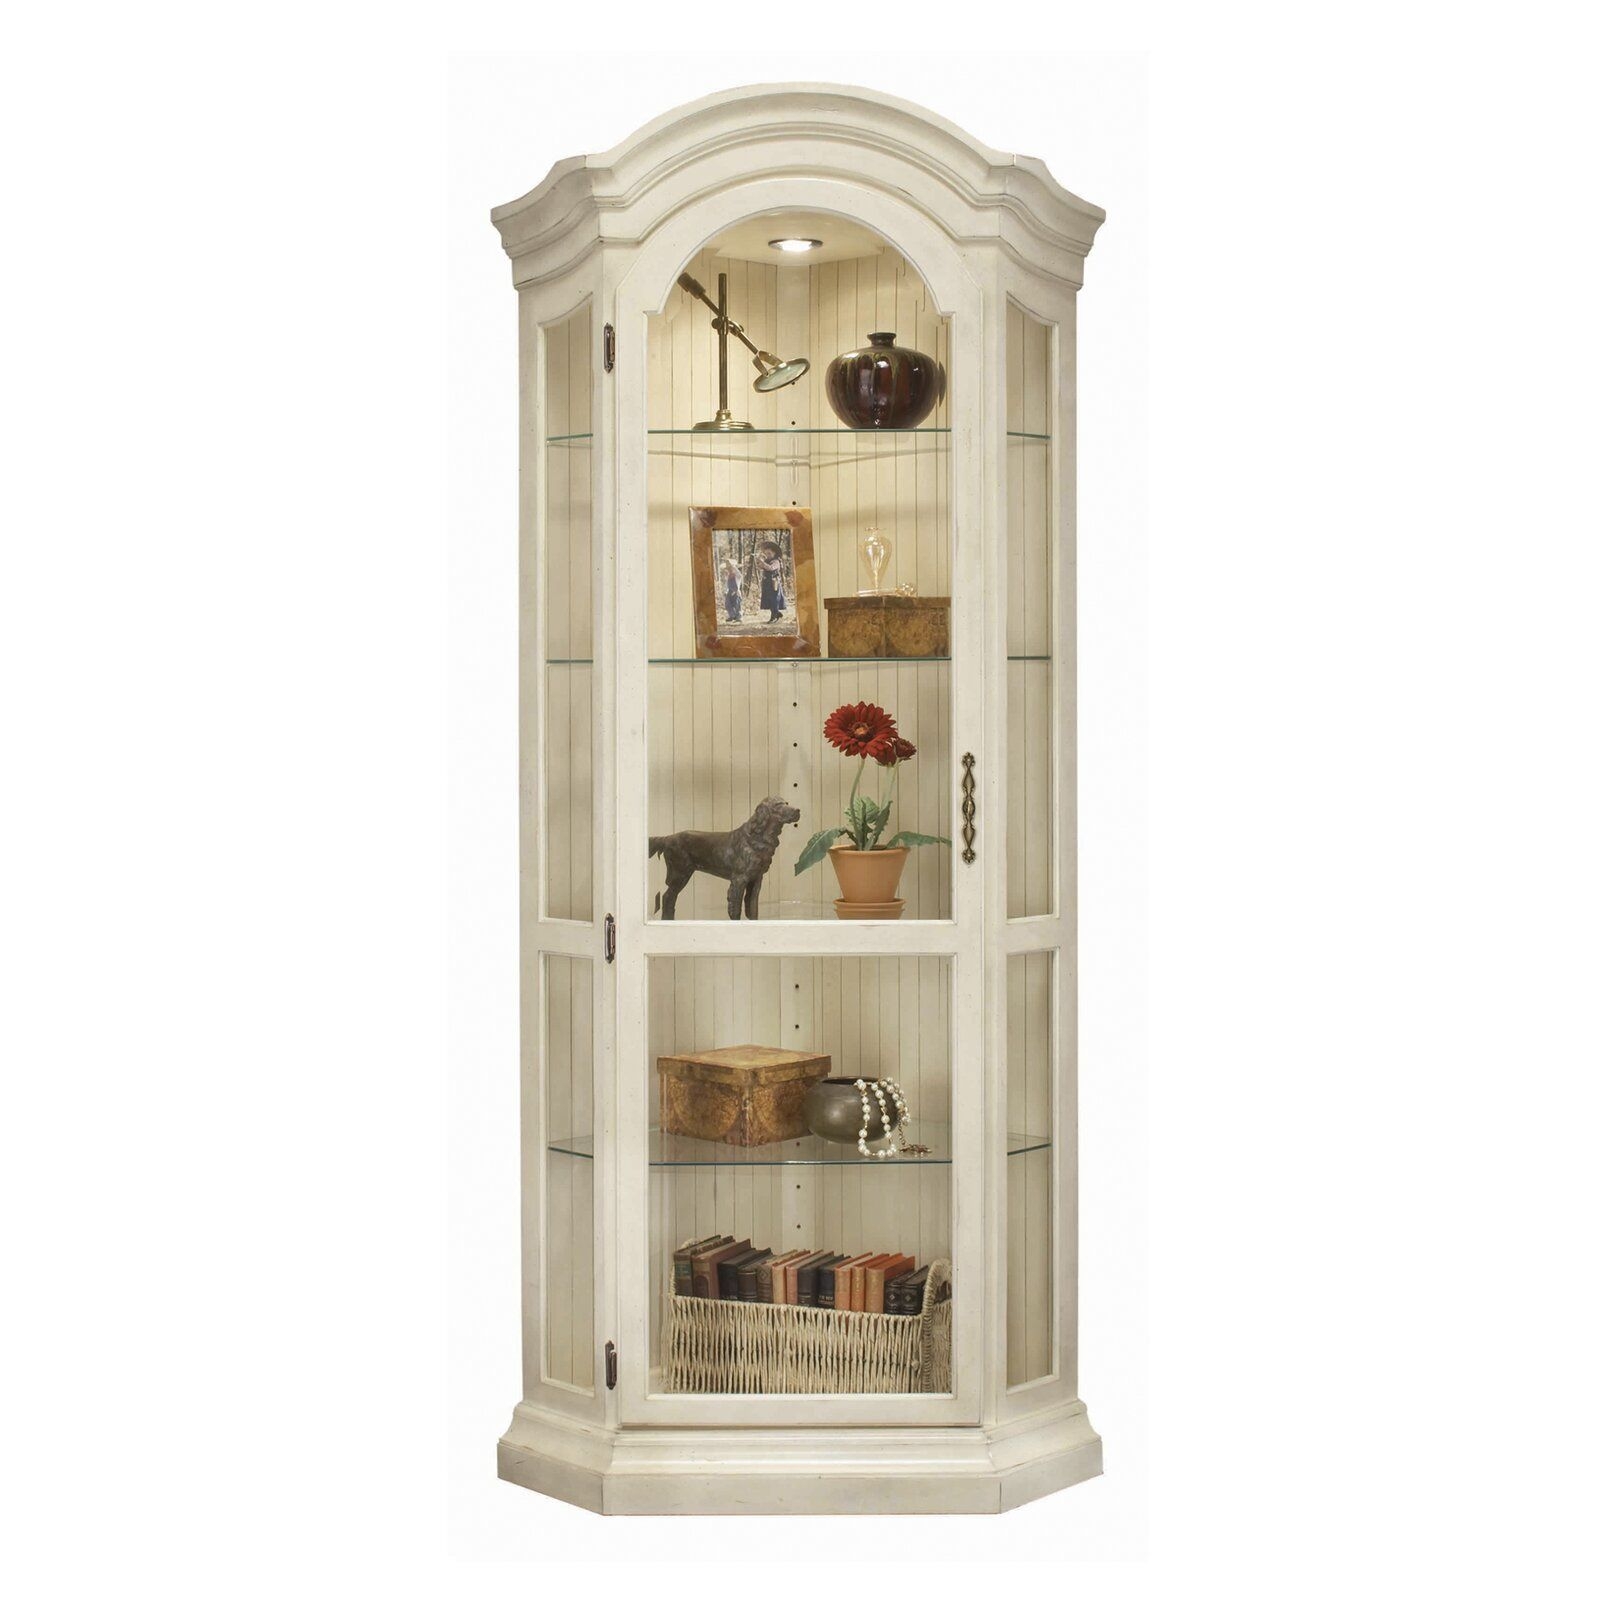 Details about   Riverbay Furniture 20" Curio Cabinet in White 